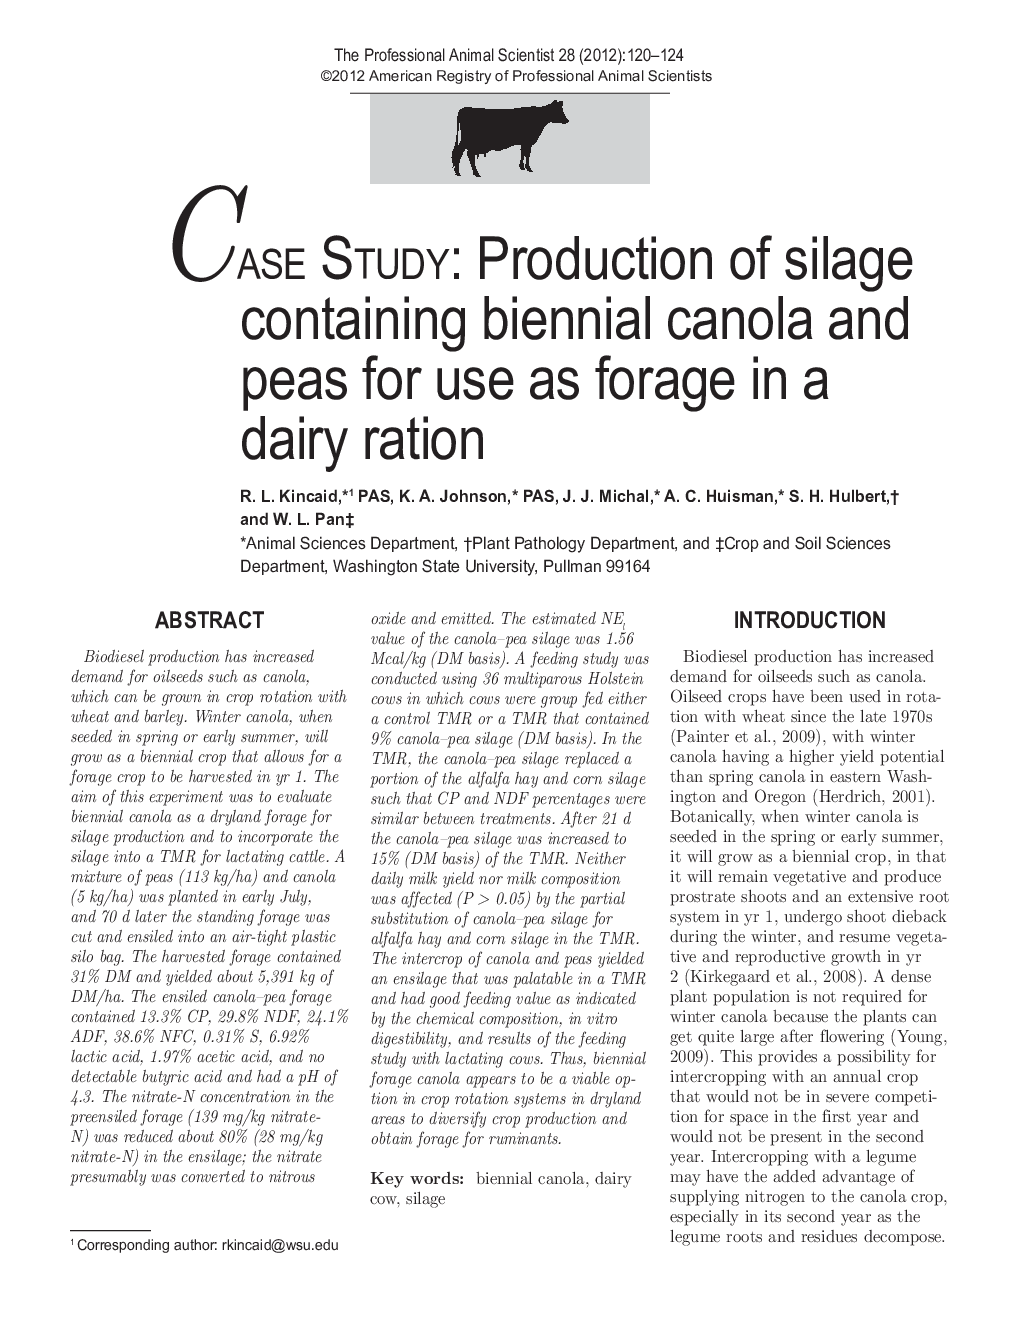 CASE STUDY: Production of silage containing biennial canola and peas for use as forage in a dairy ration